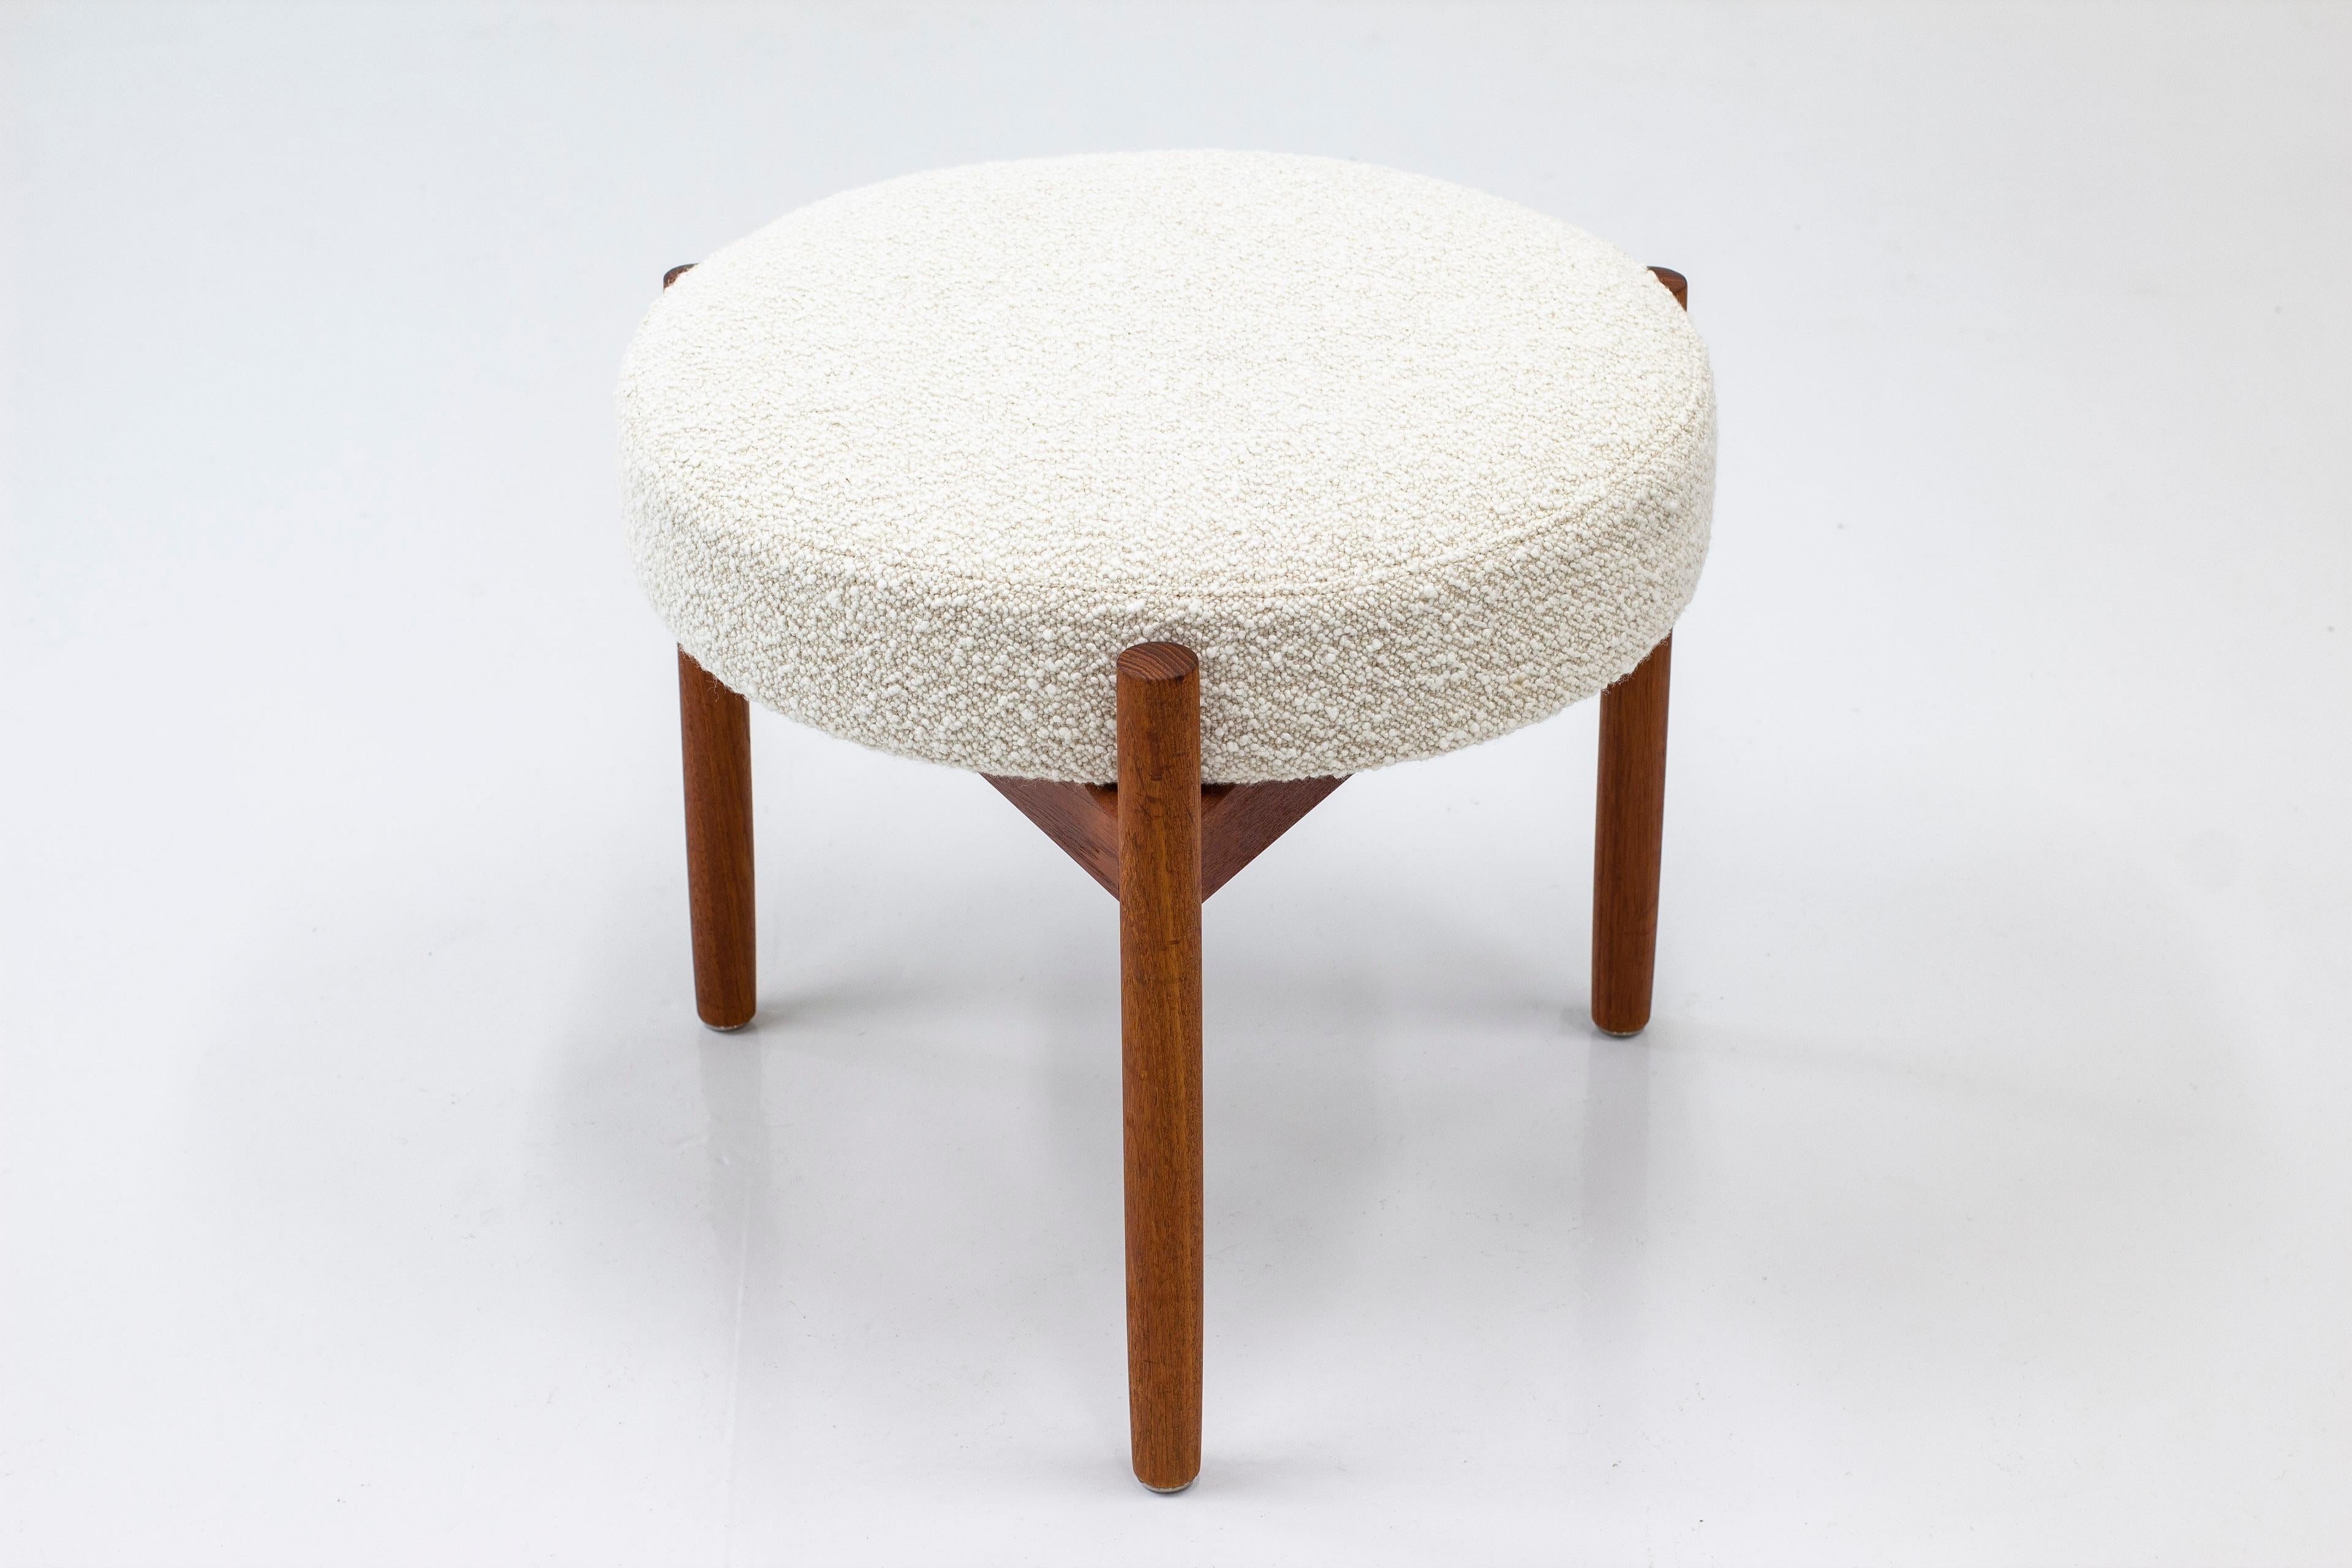 Round stool designed by Hugo Frandsen. Produced by his own company in Denmark during the 1960s. Made from solid teak with off-white melange wool upholstery in a bouclé style. Very good vintage condition with light signs of age related wear and